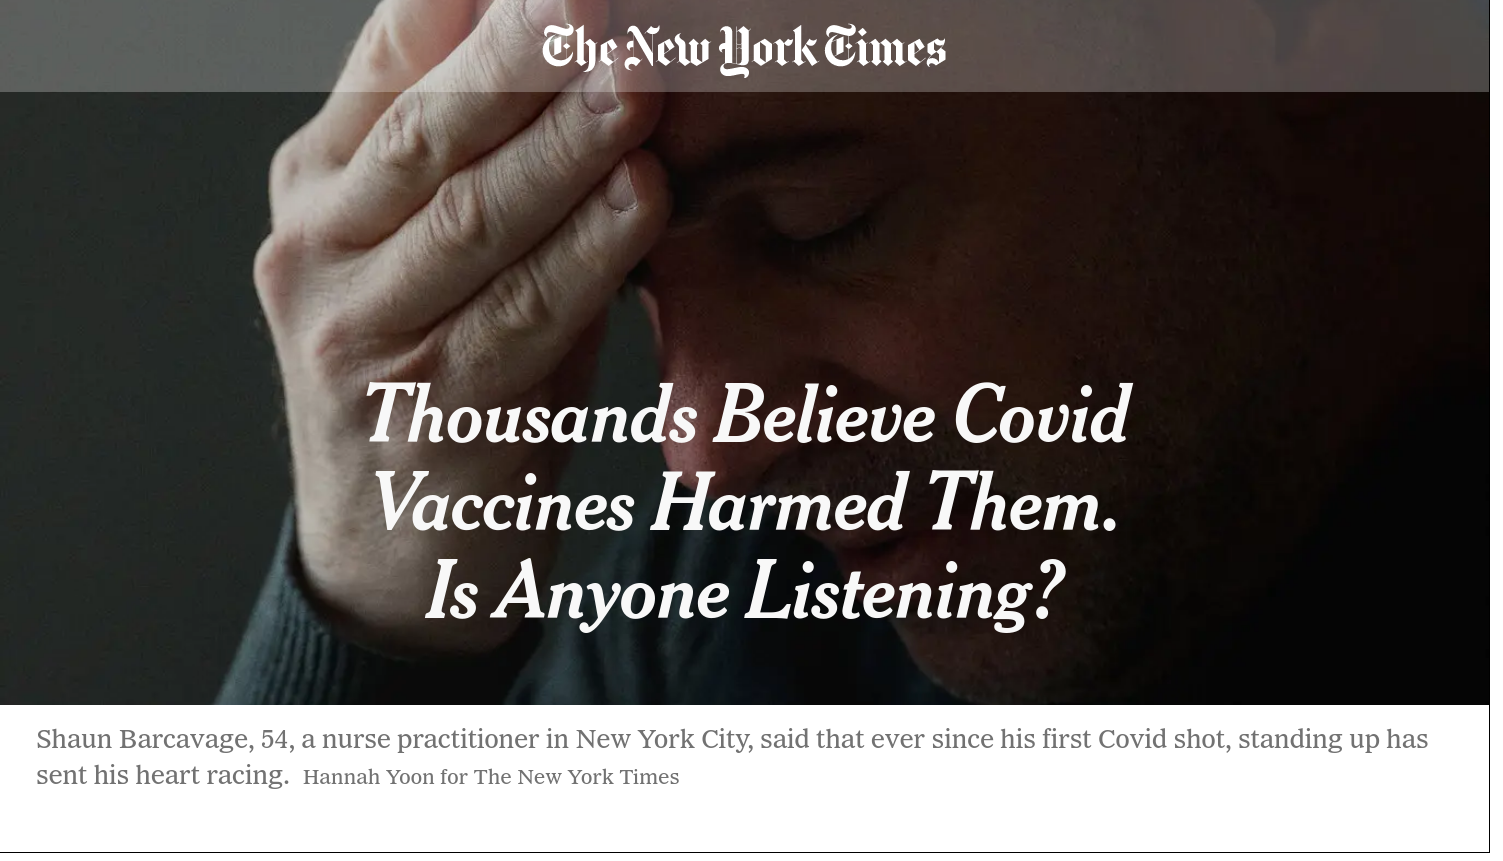 Thousands Believe Covid Vaccines Harmed Them. Is Anyone Listening?